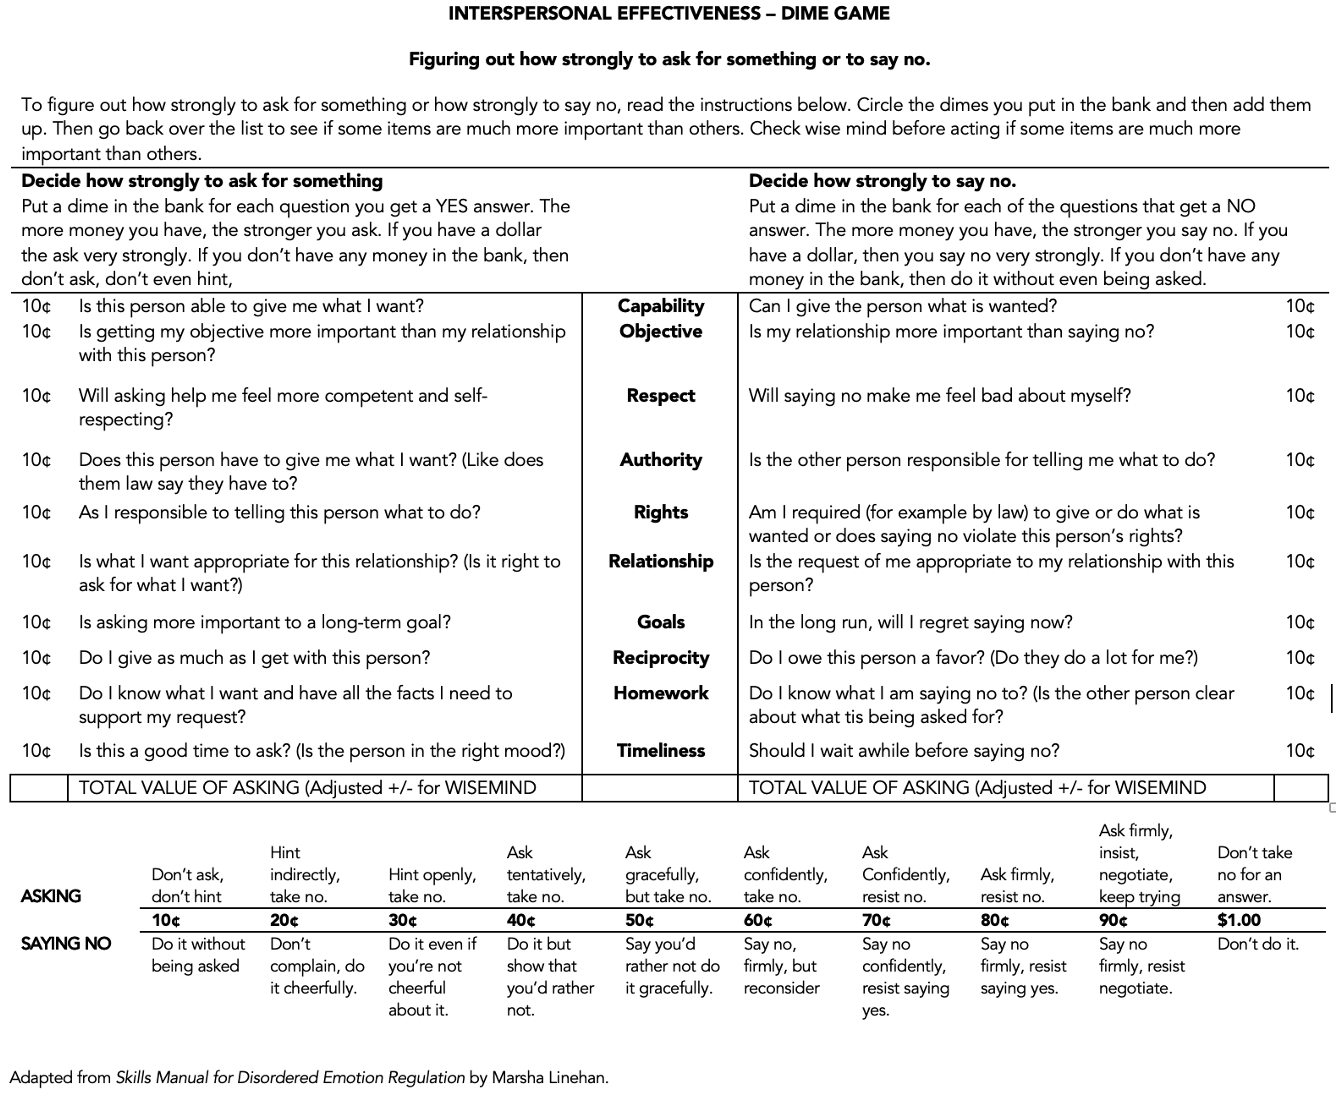 Interpersonal Effectiveness Criteria For Saying Yes And No Middle 